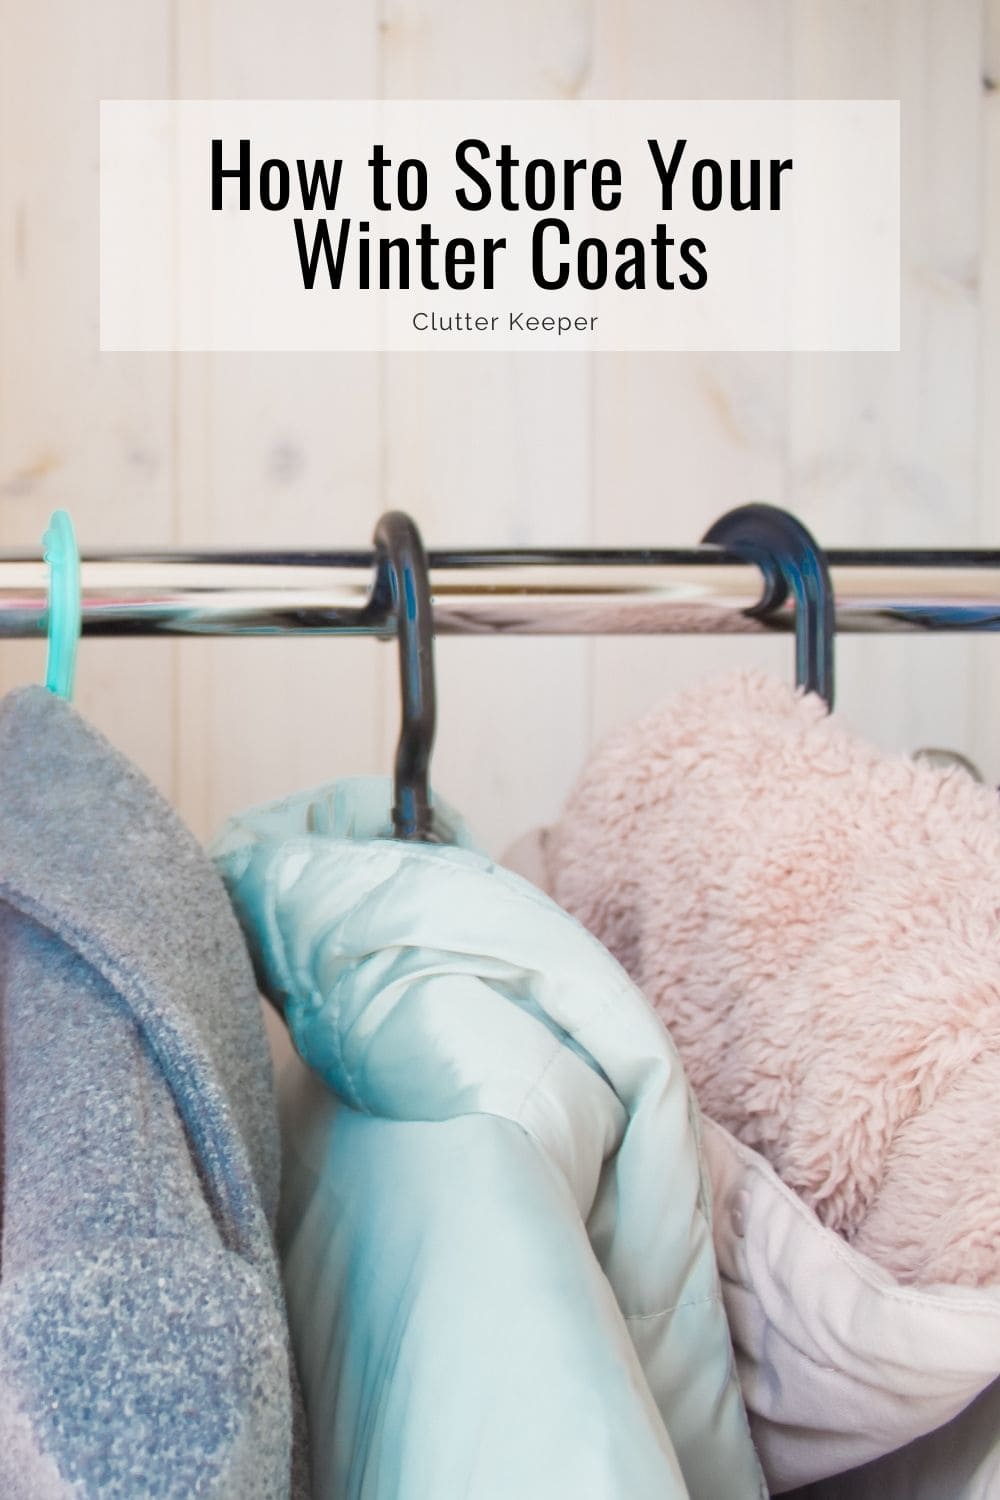 How to store your winter coats.